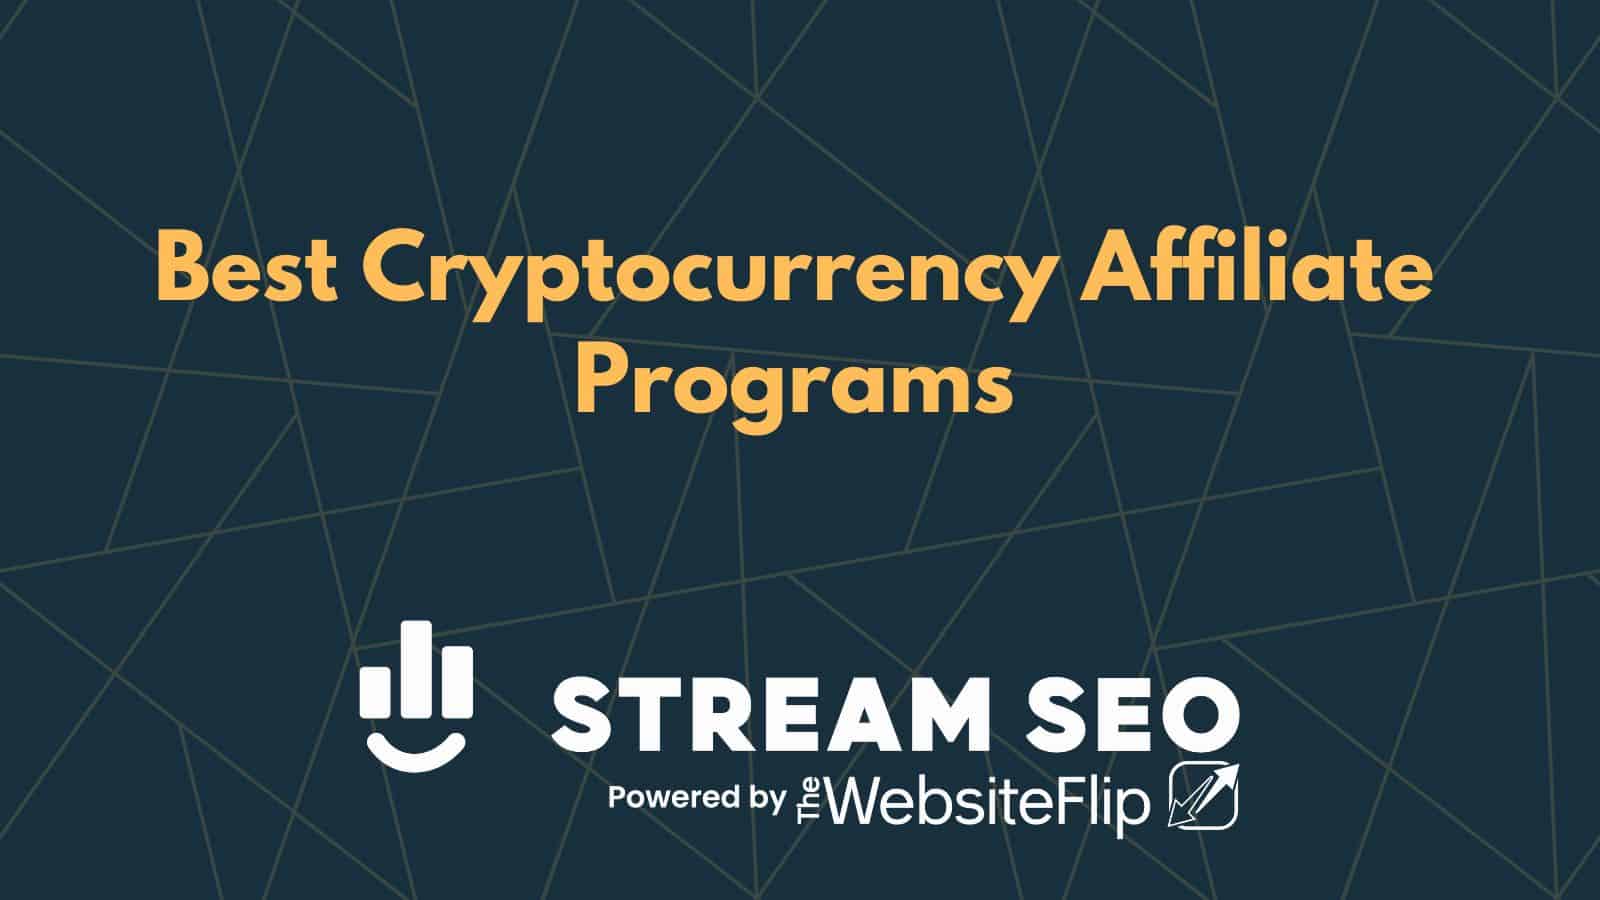 11 Best Cryptocurrency Affiliate Programs